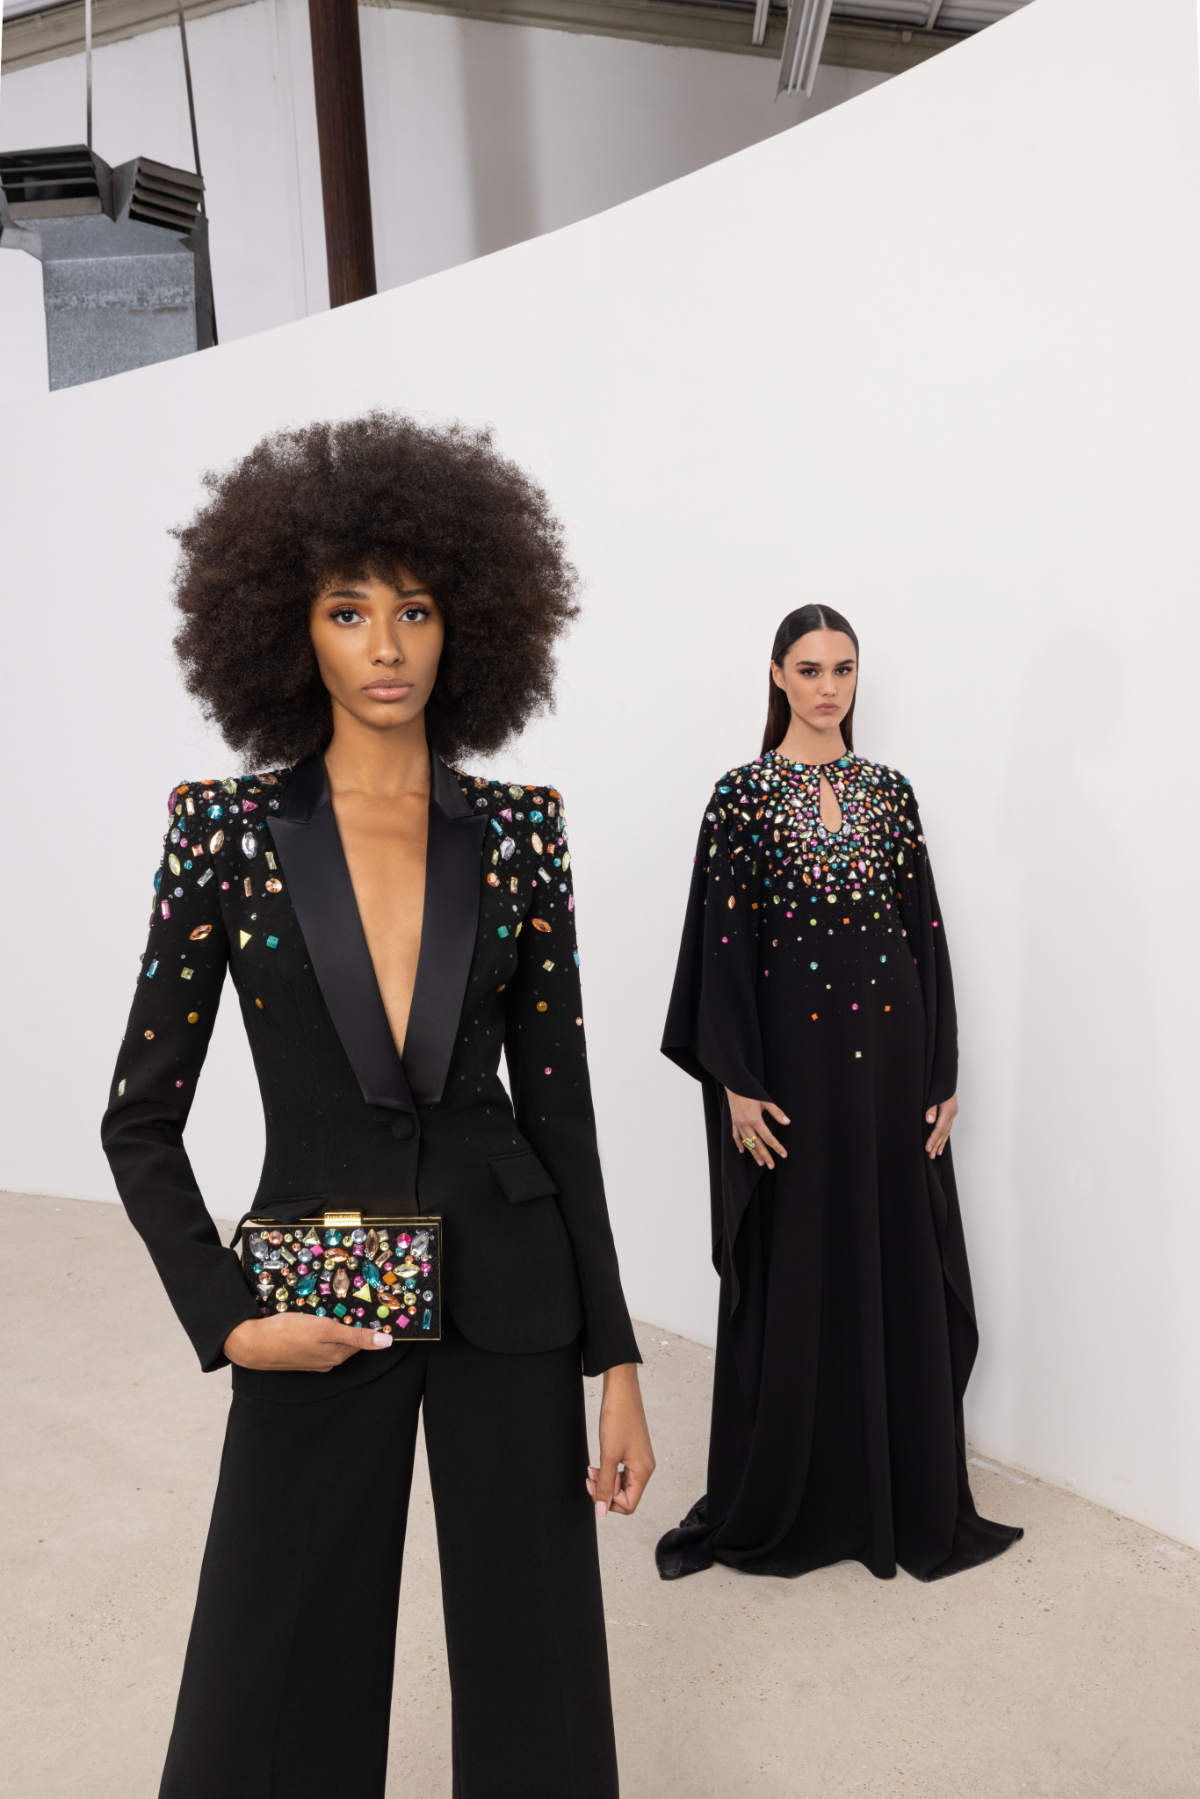 Zuhair Murad Presents Its New Spring-Summer 2023 Ready-To-Wear Collection: Ripple Of Matter